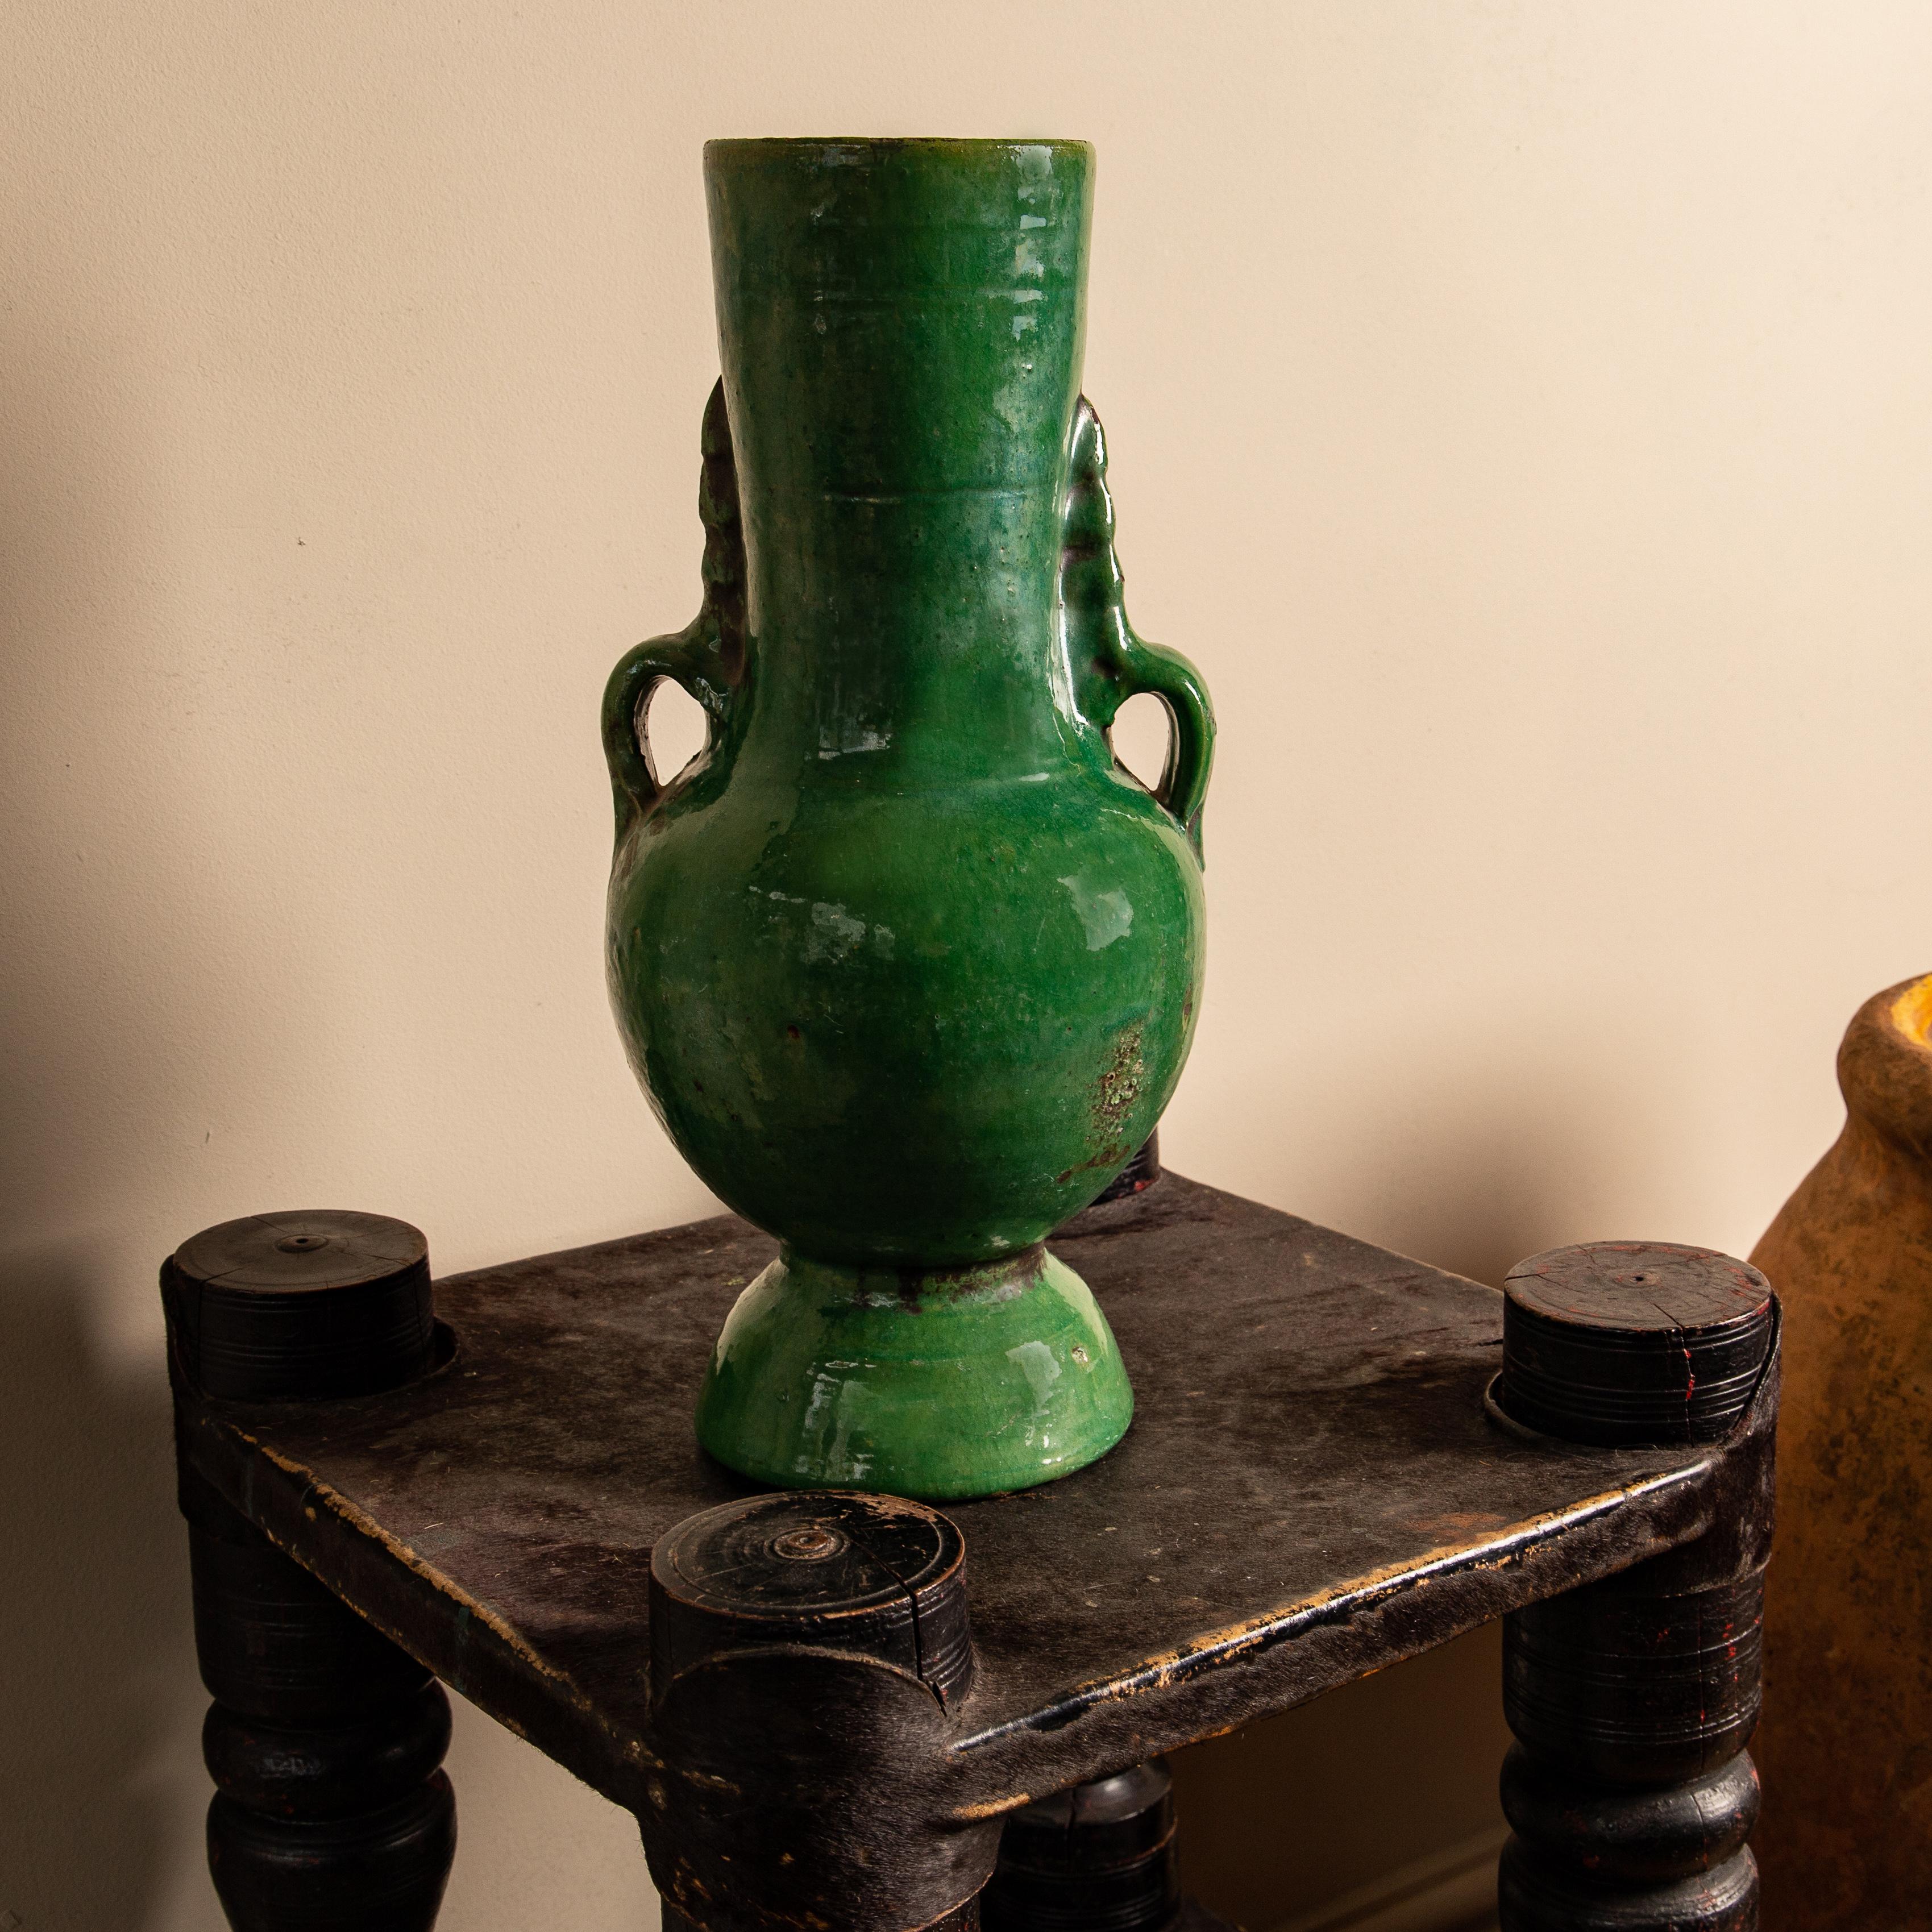 Morocco, circa 1850

Of ancient sculptural form, an original tribal piece from the village of Tamegroute located in the Draa River valley in southern Morocco. With characteristic green glaze showing great patina. Some minor defects around the top